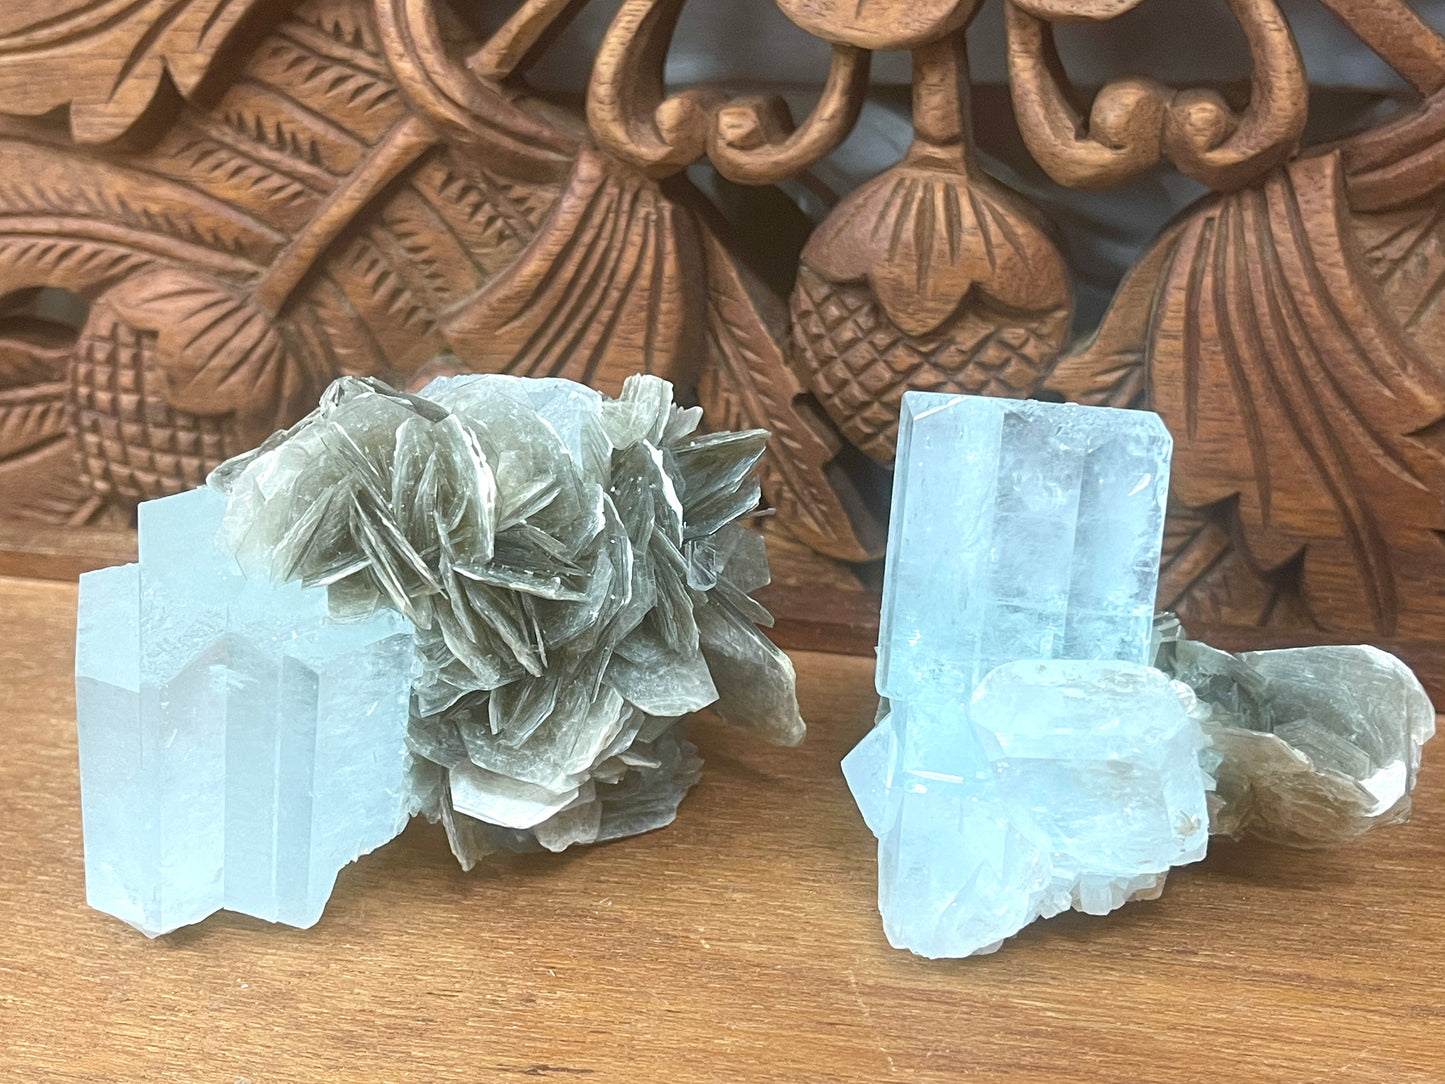 A++ Quality Aquamarine Specimens from Nagar Valley, Pakistan - 2 Available